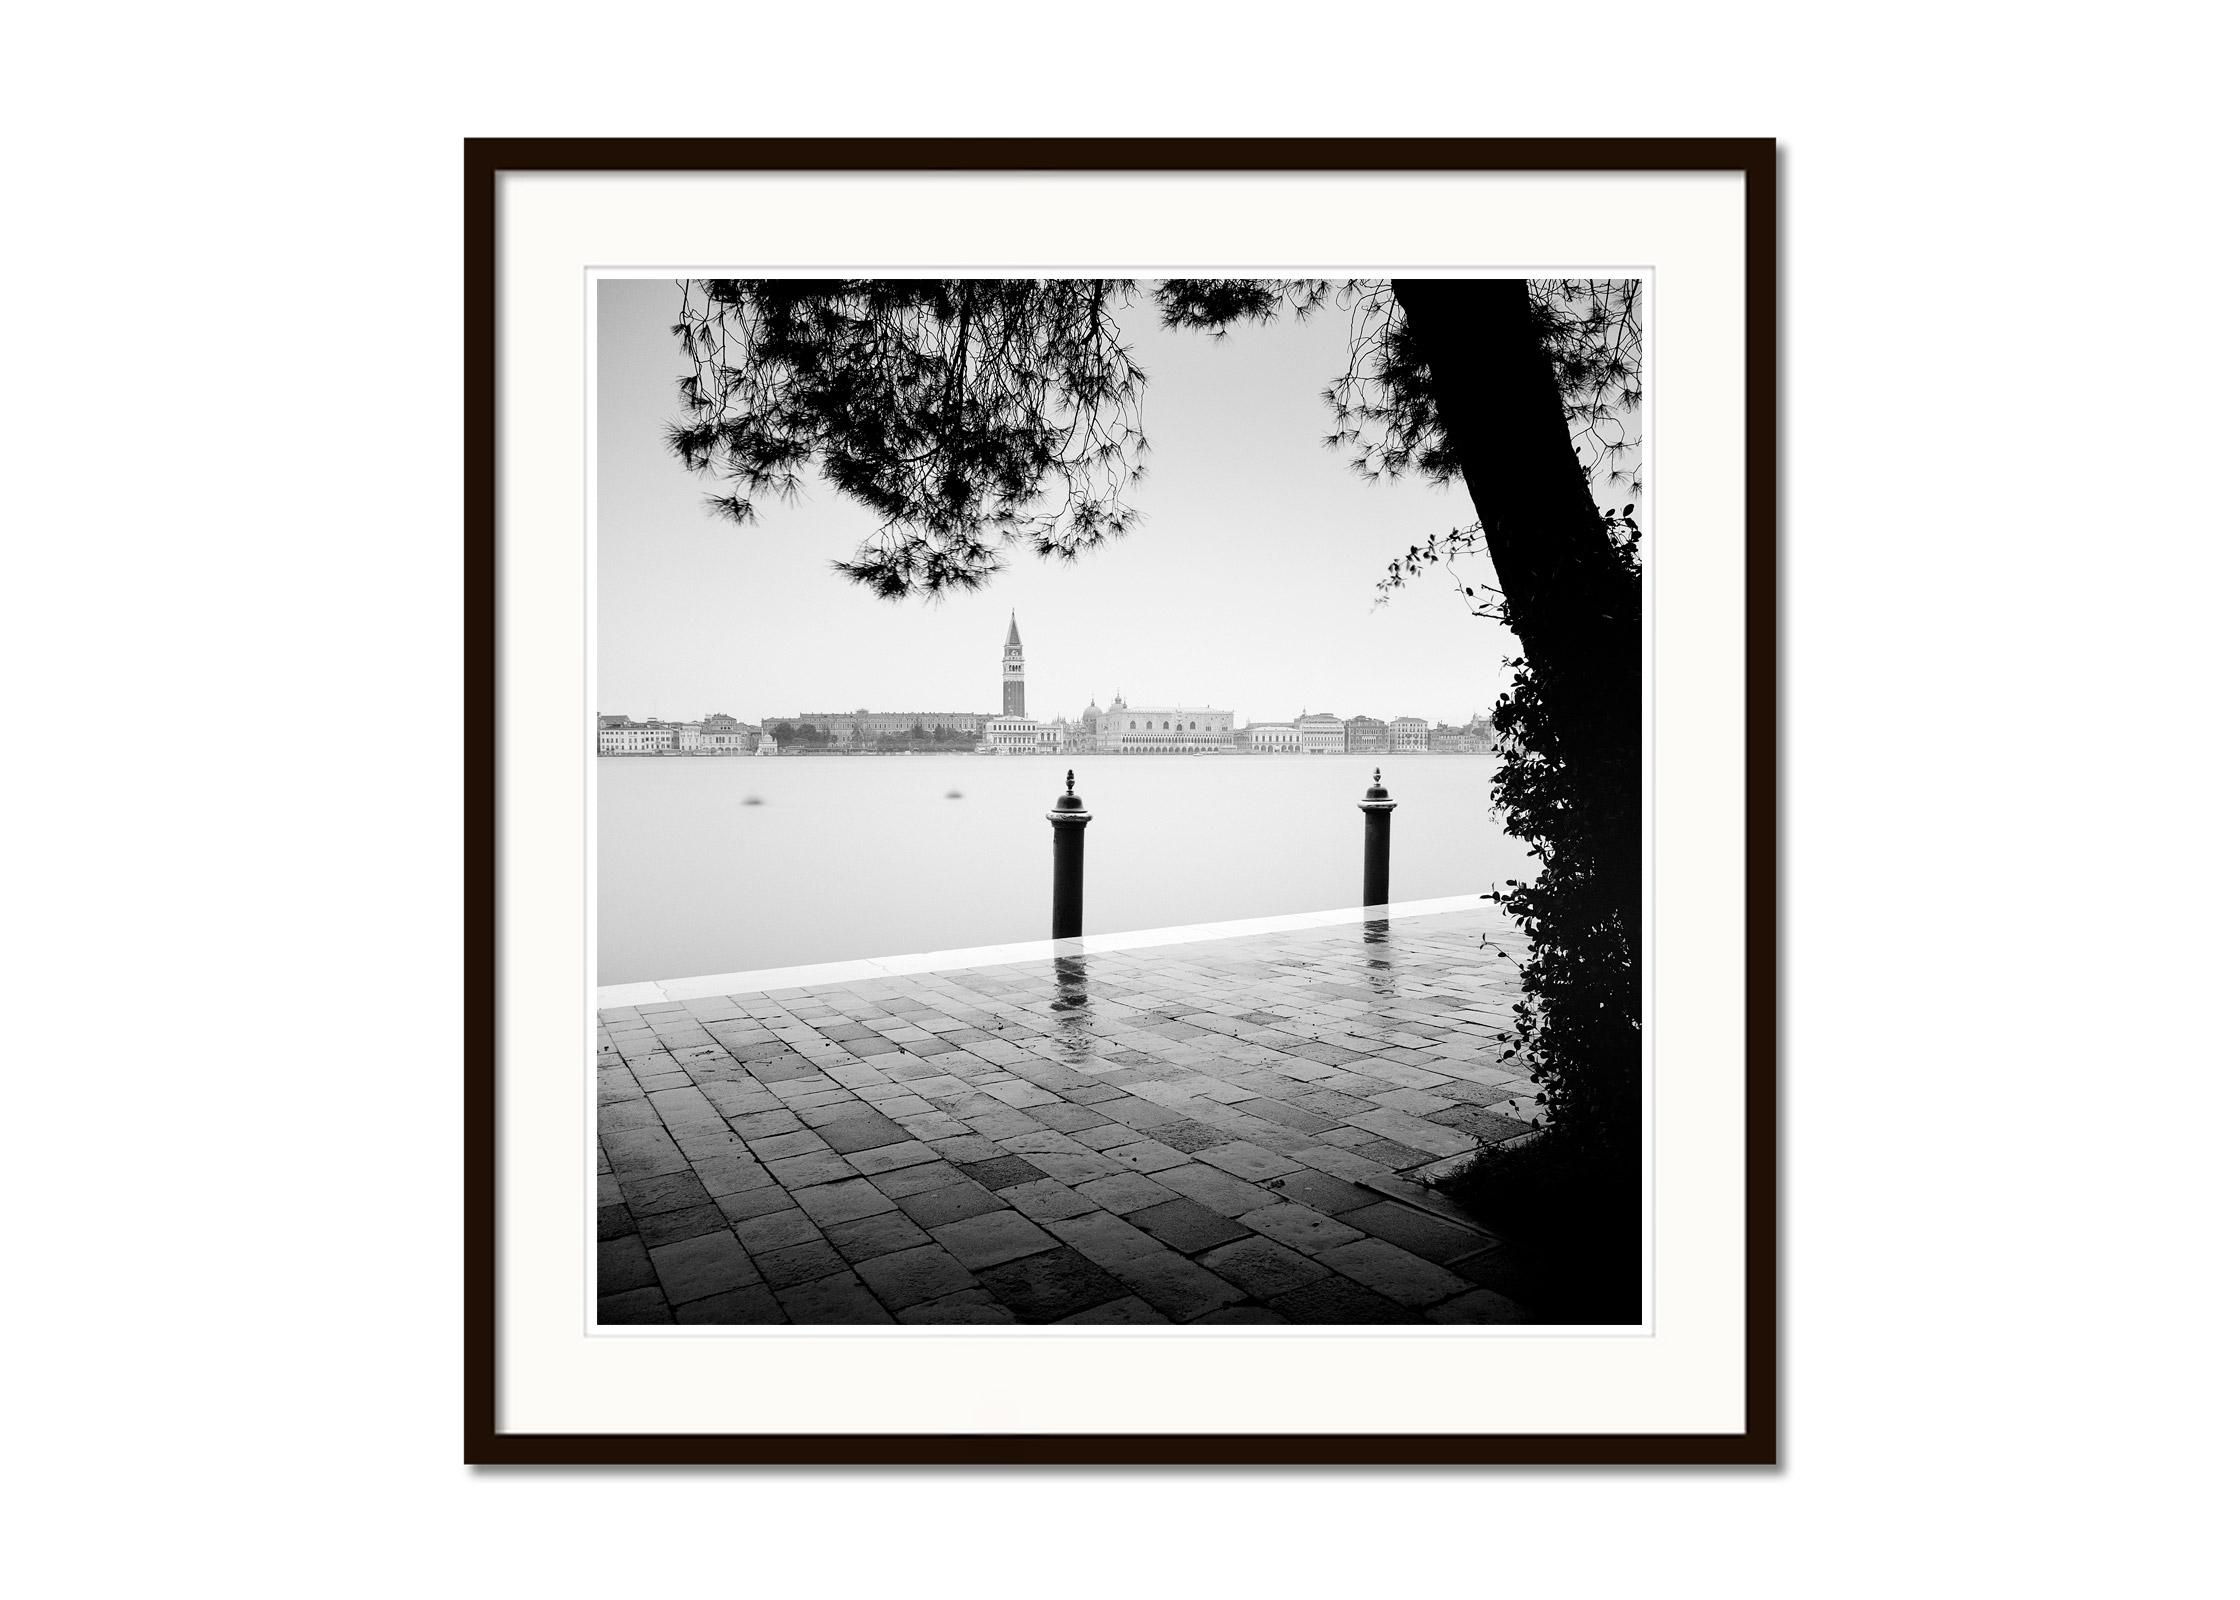 Piazza San Marco, Venice, Canal Grande, black and white photography, landscape - Contemporary Photograph by Gerald Berghammer